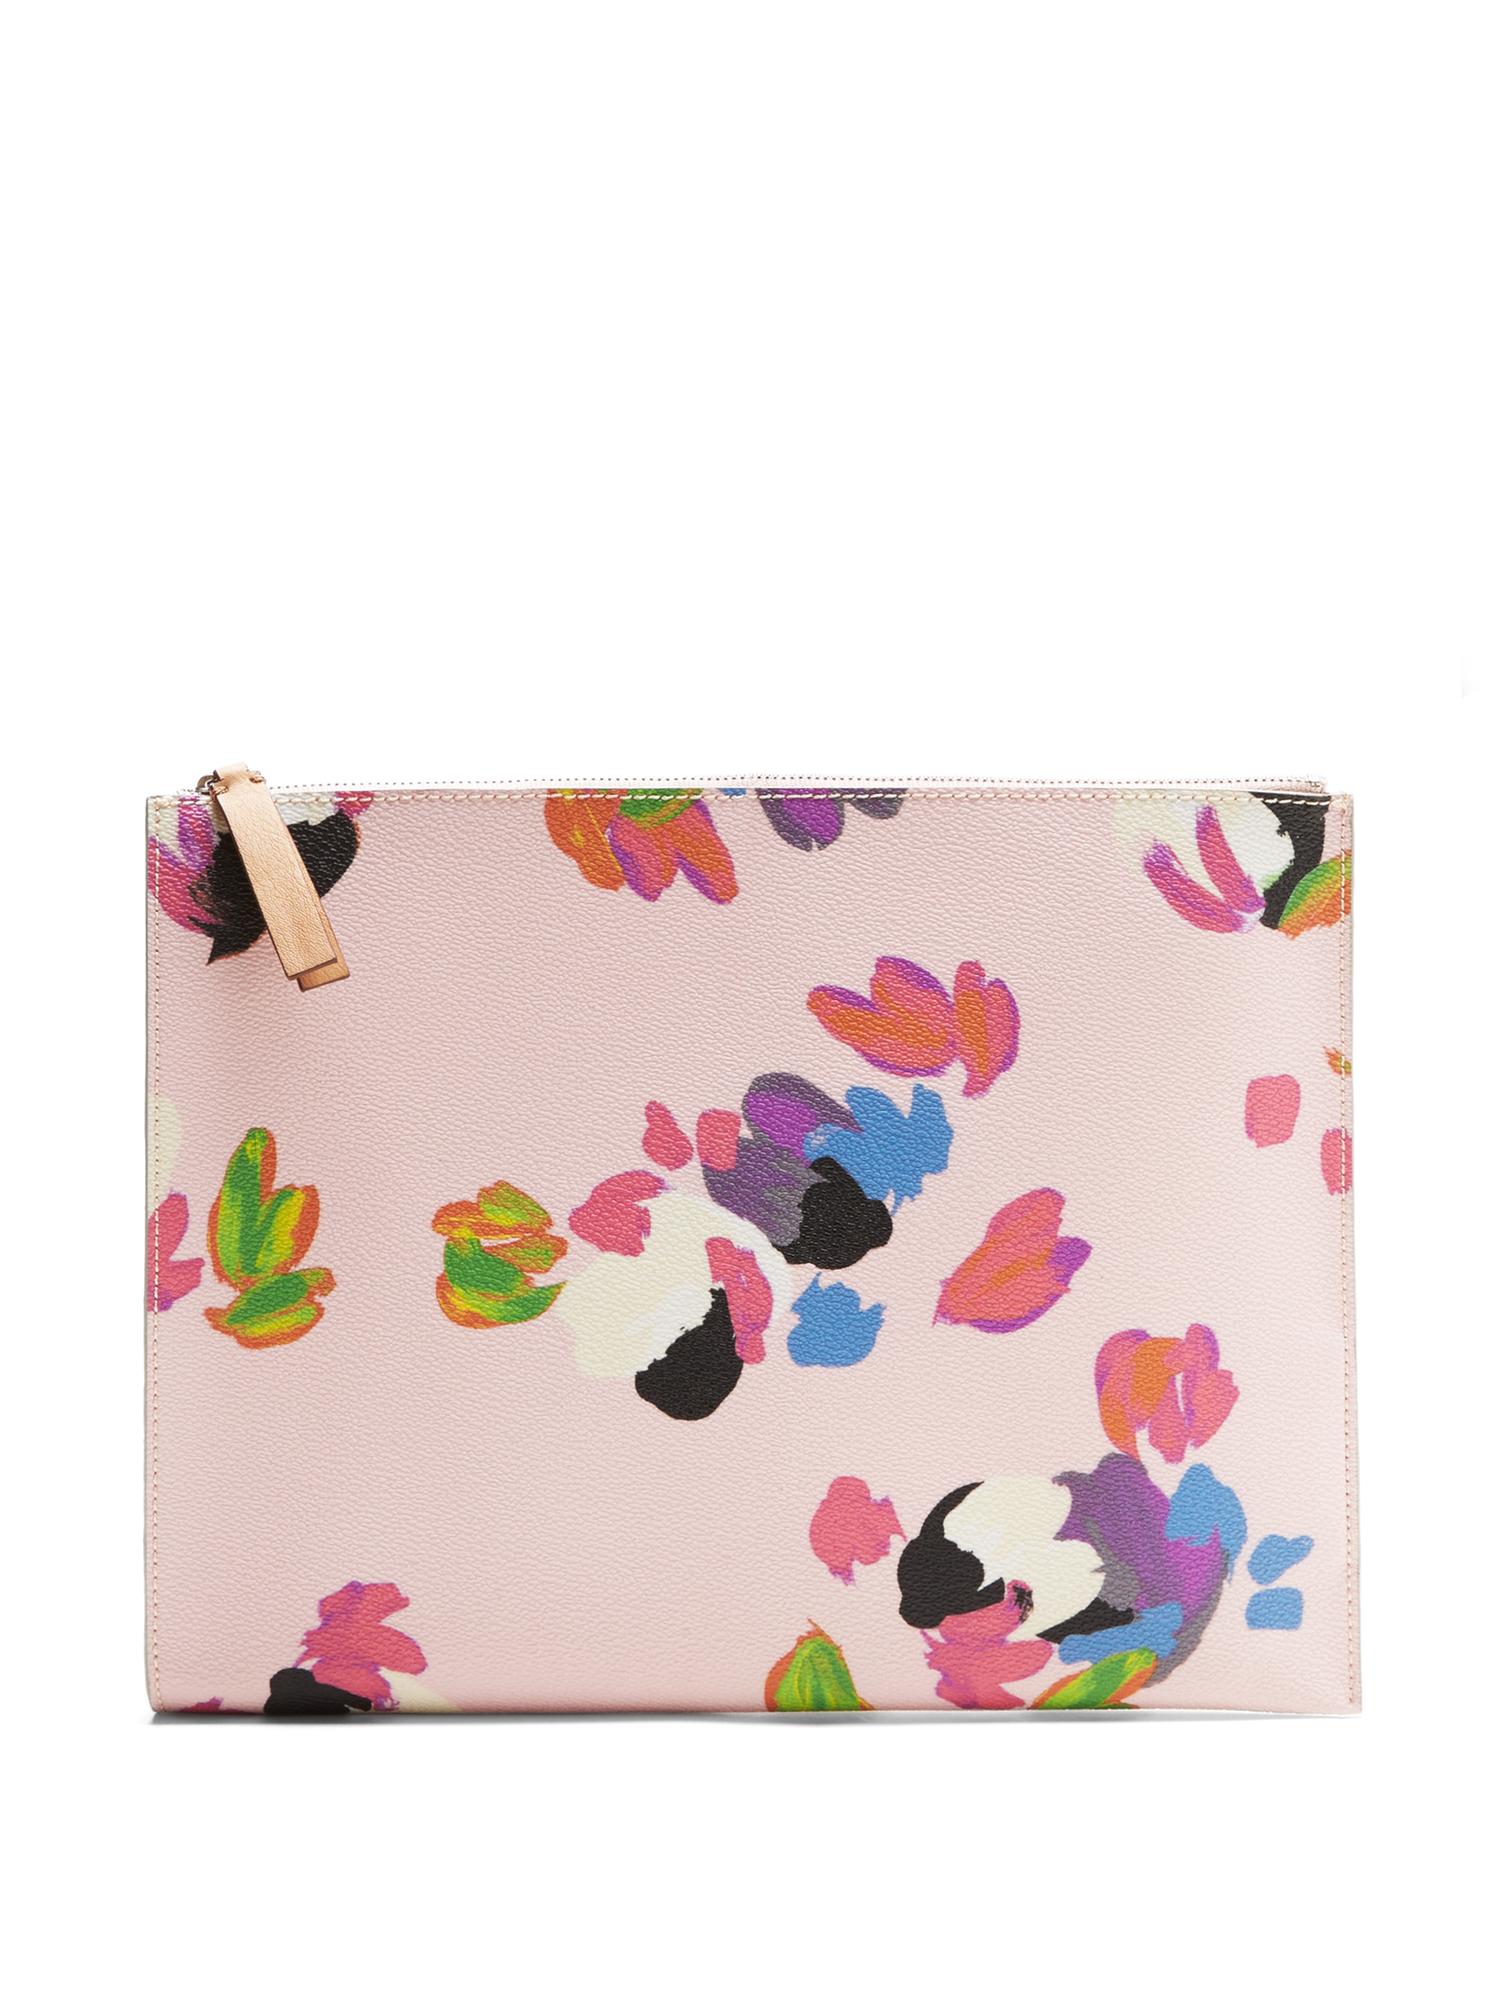 Large Pink Floral Zip Pouch